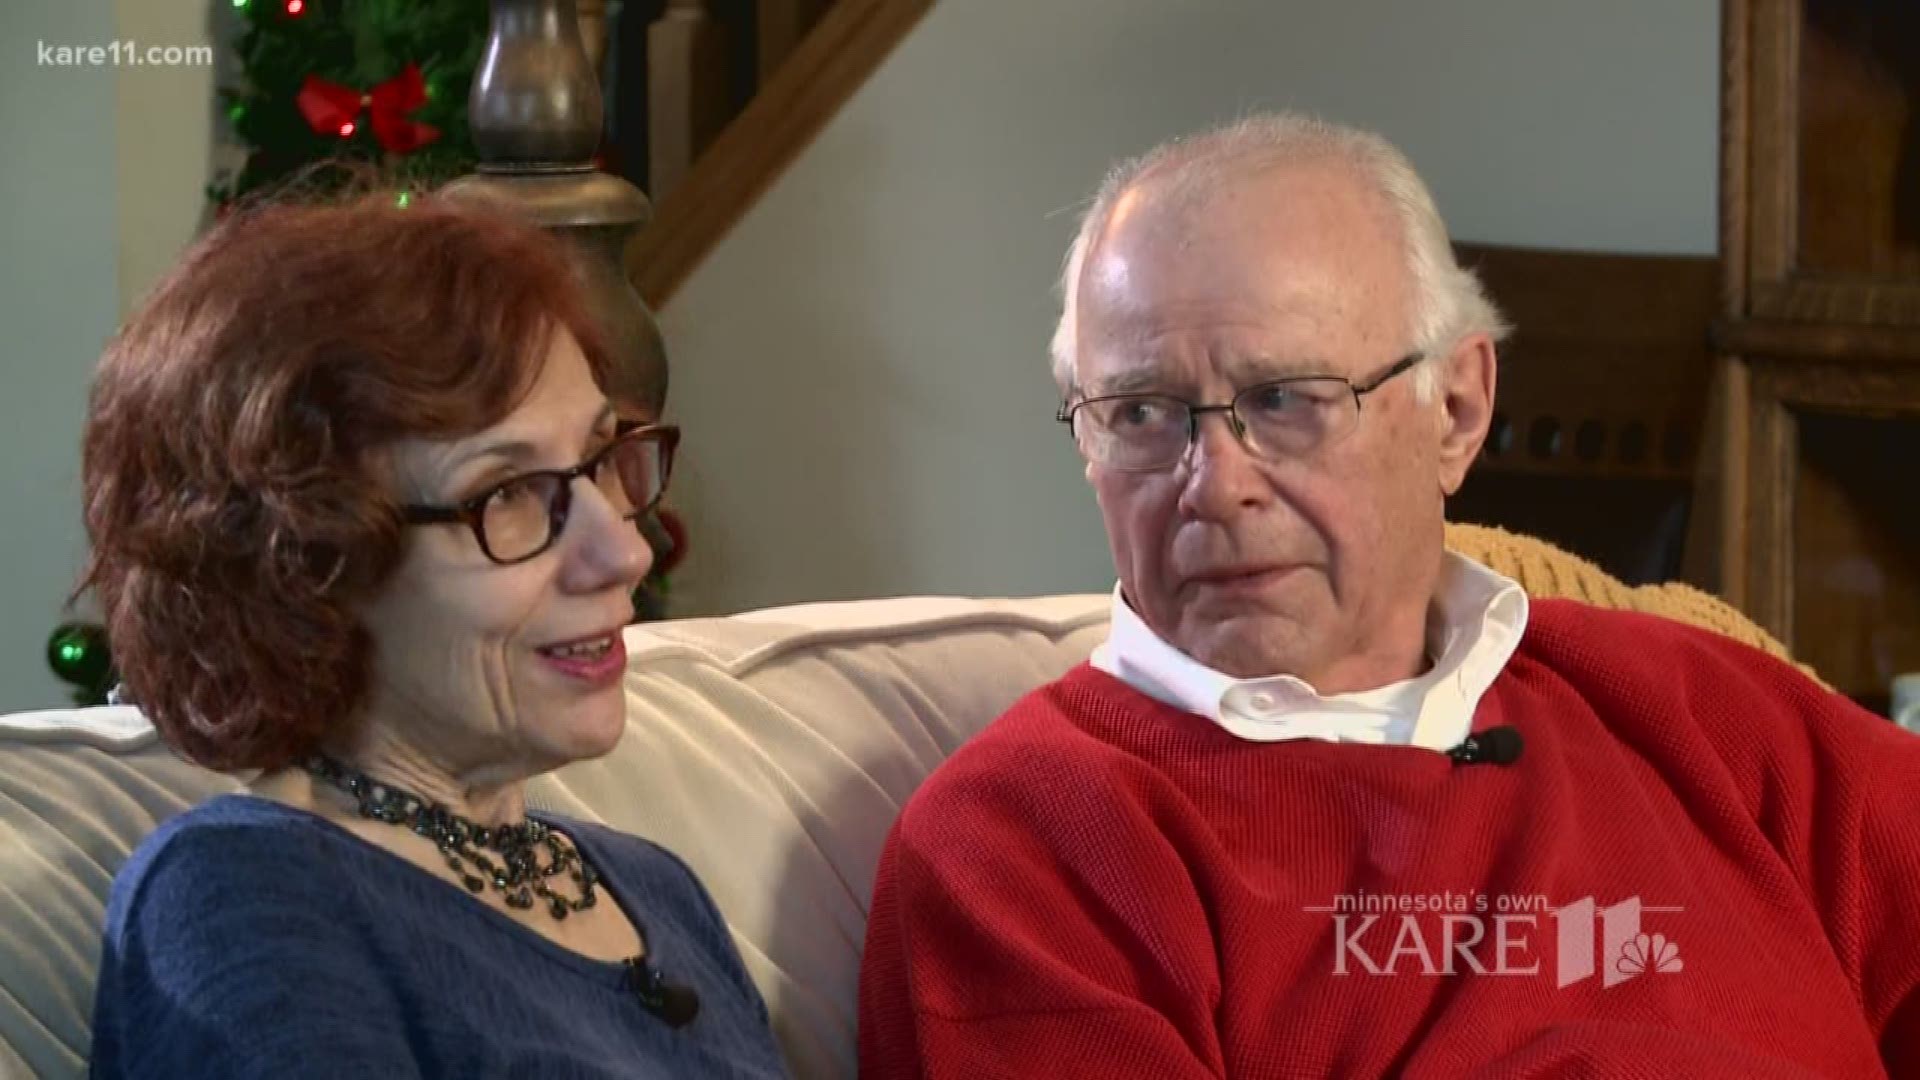 When Karen got pregnant at just 15, her parents forbade her and Dennis from marrying. He joined the Army, she left for college -- and her father intercepted his messages for years. But five decades later, their story wasn't over.